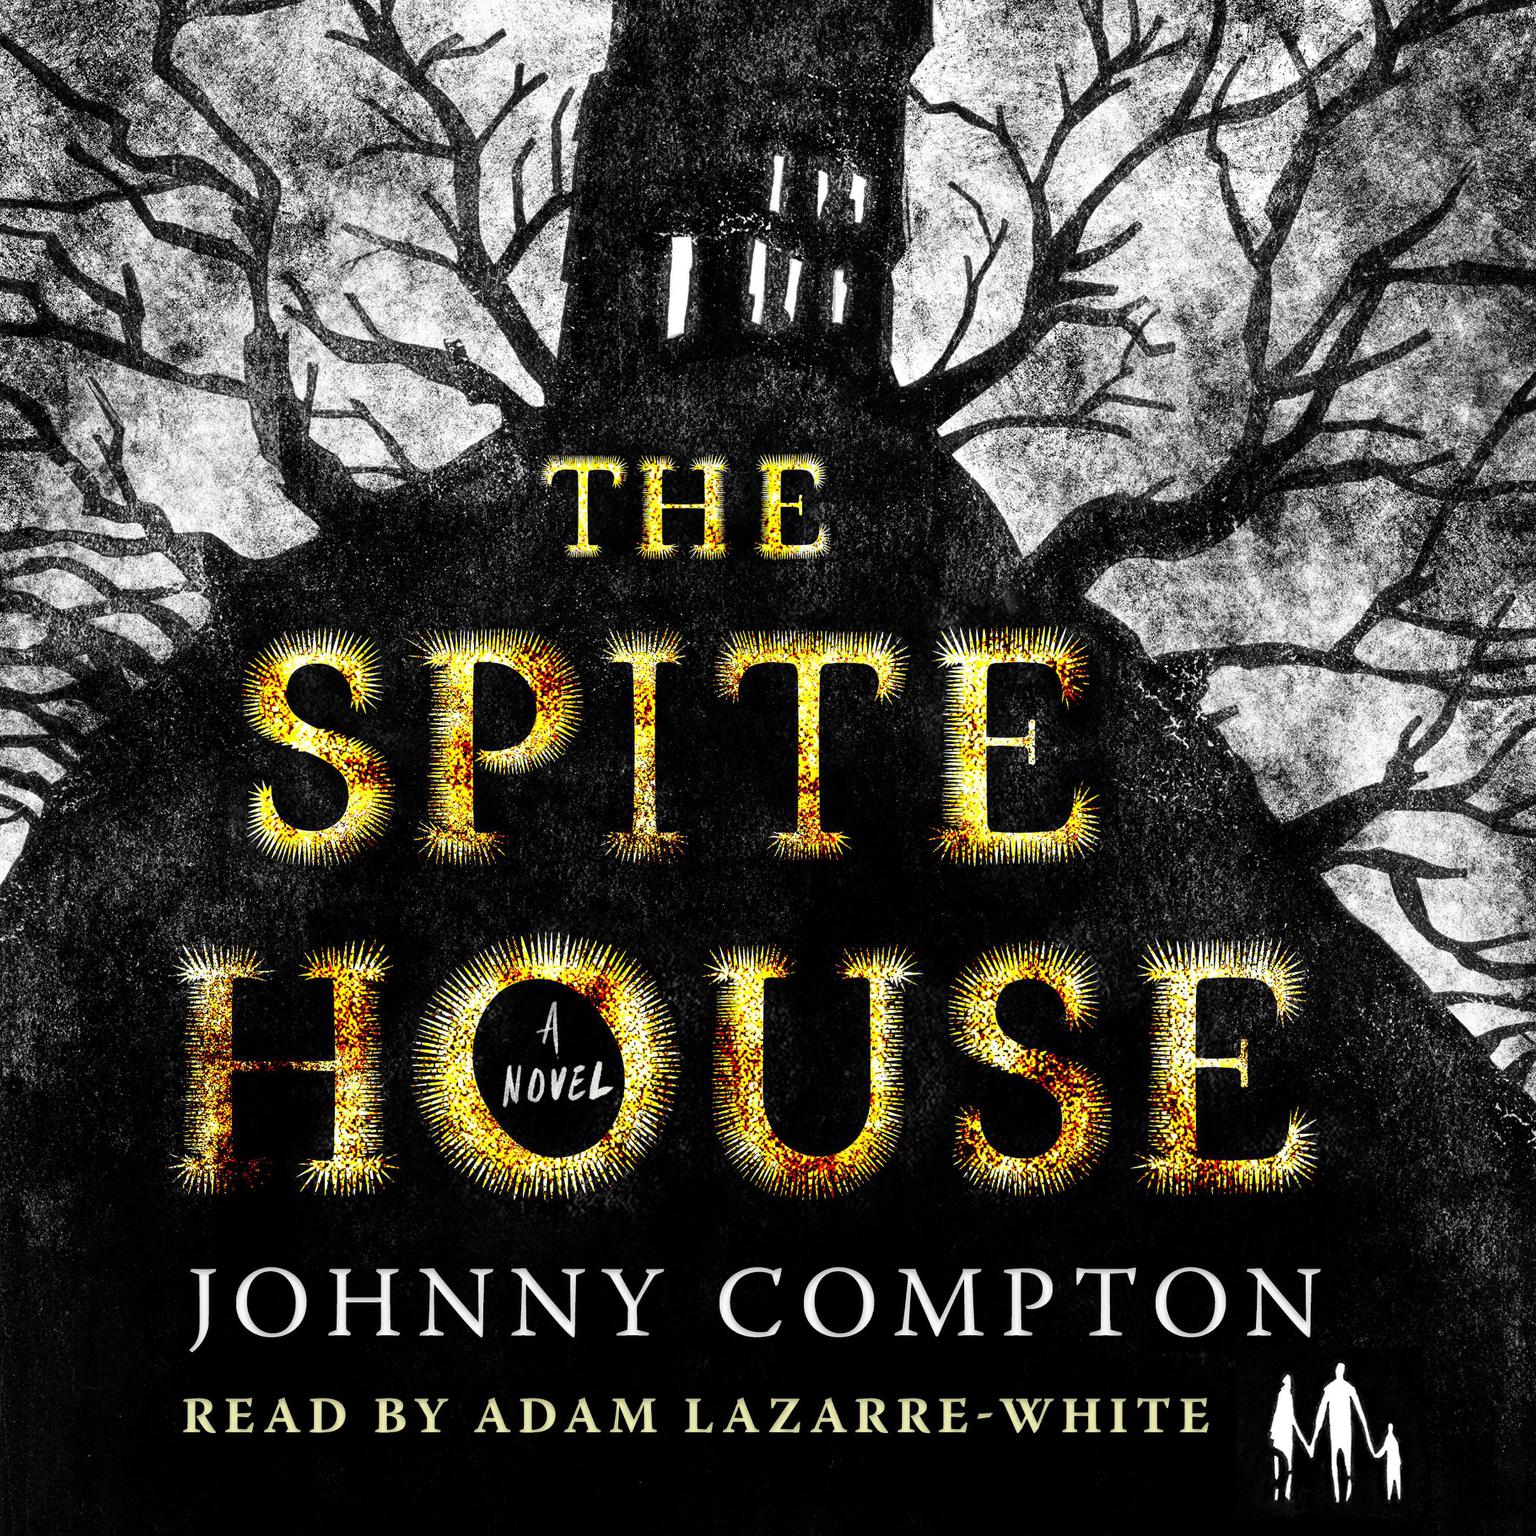 The Spite House: A Novel Audiobook, by Johnny Compton